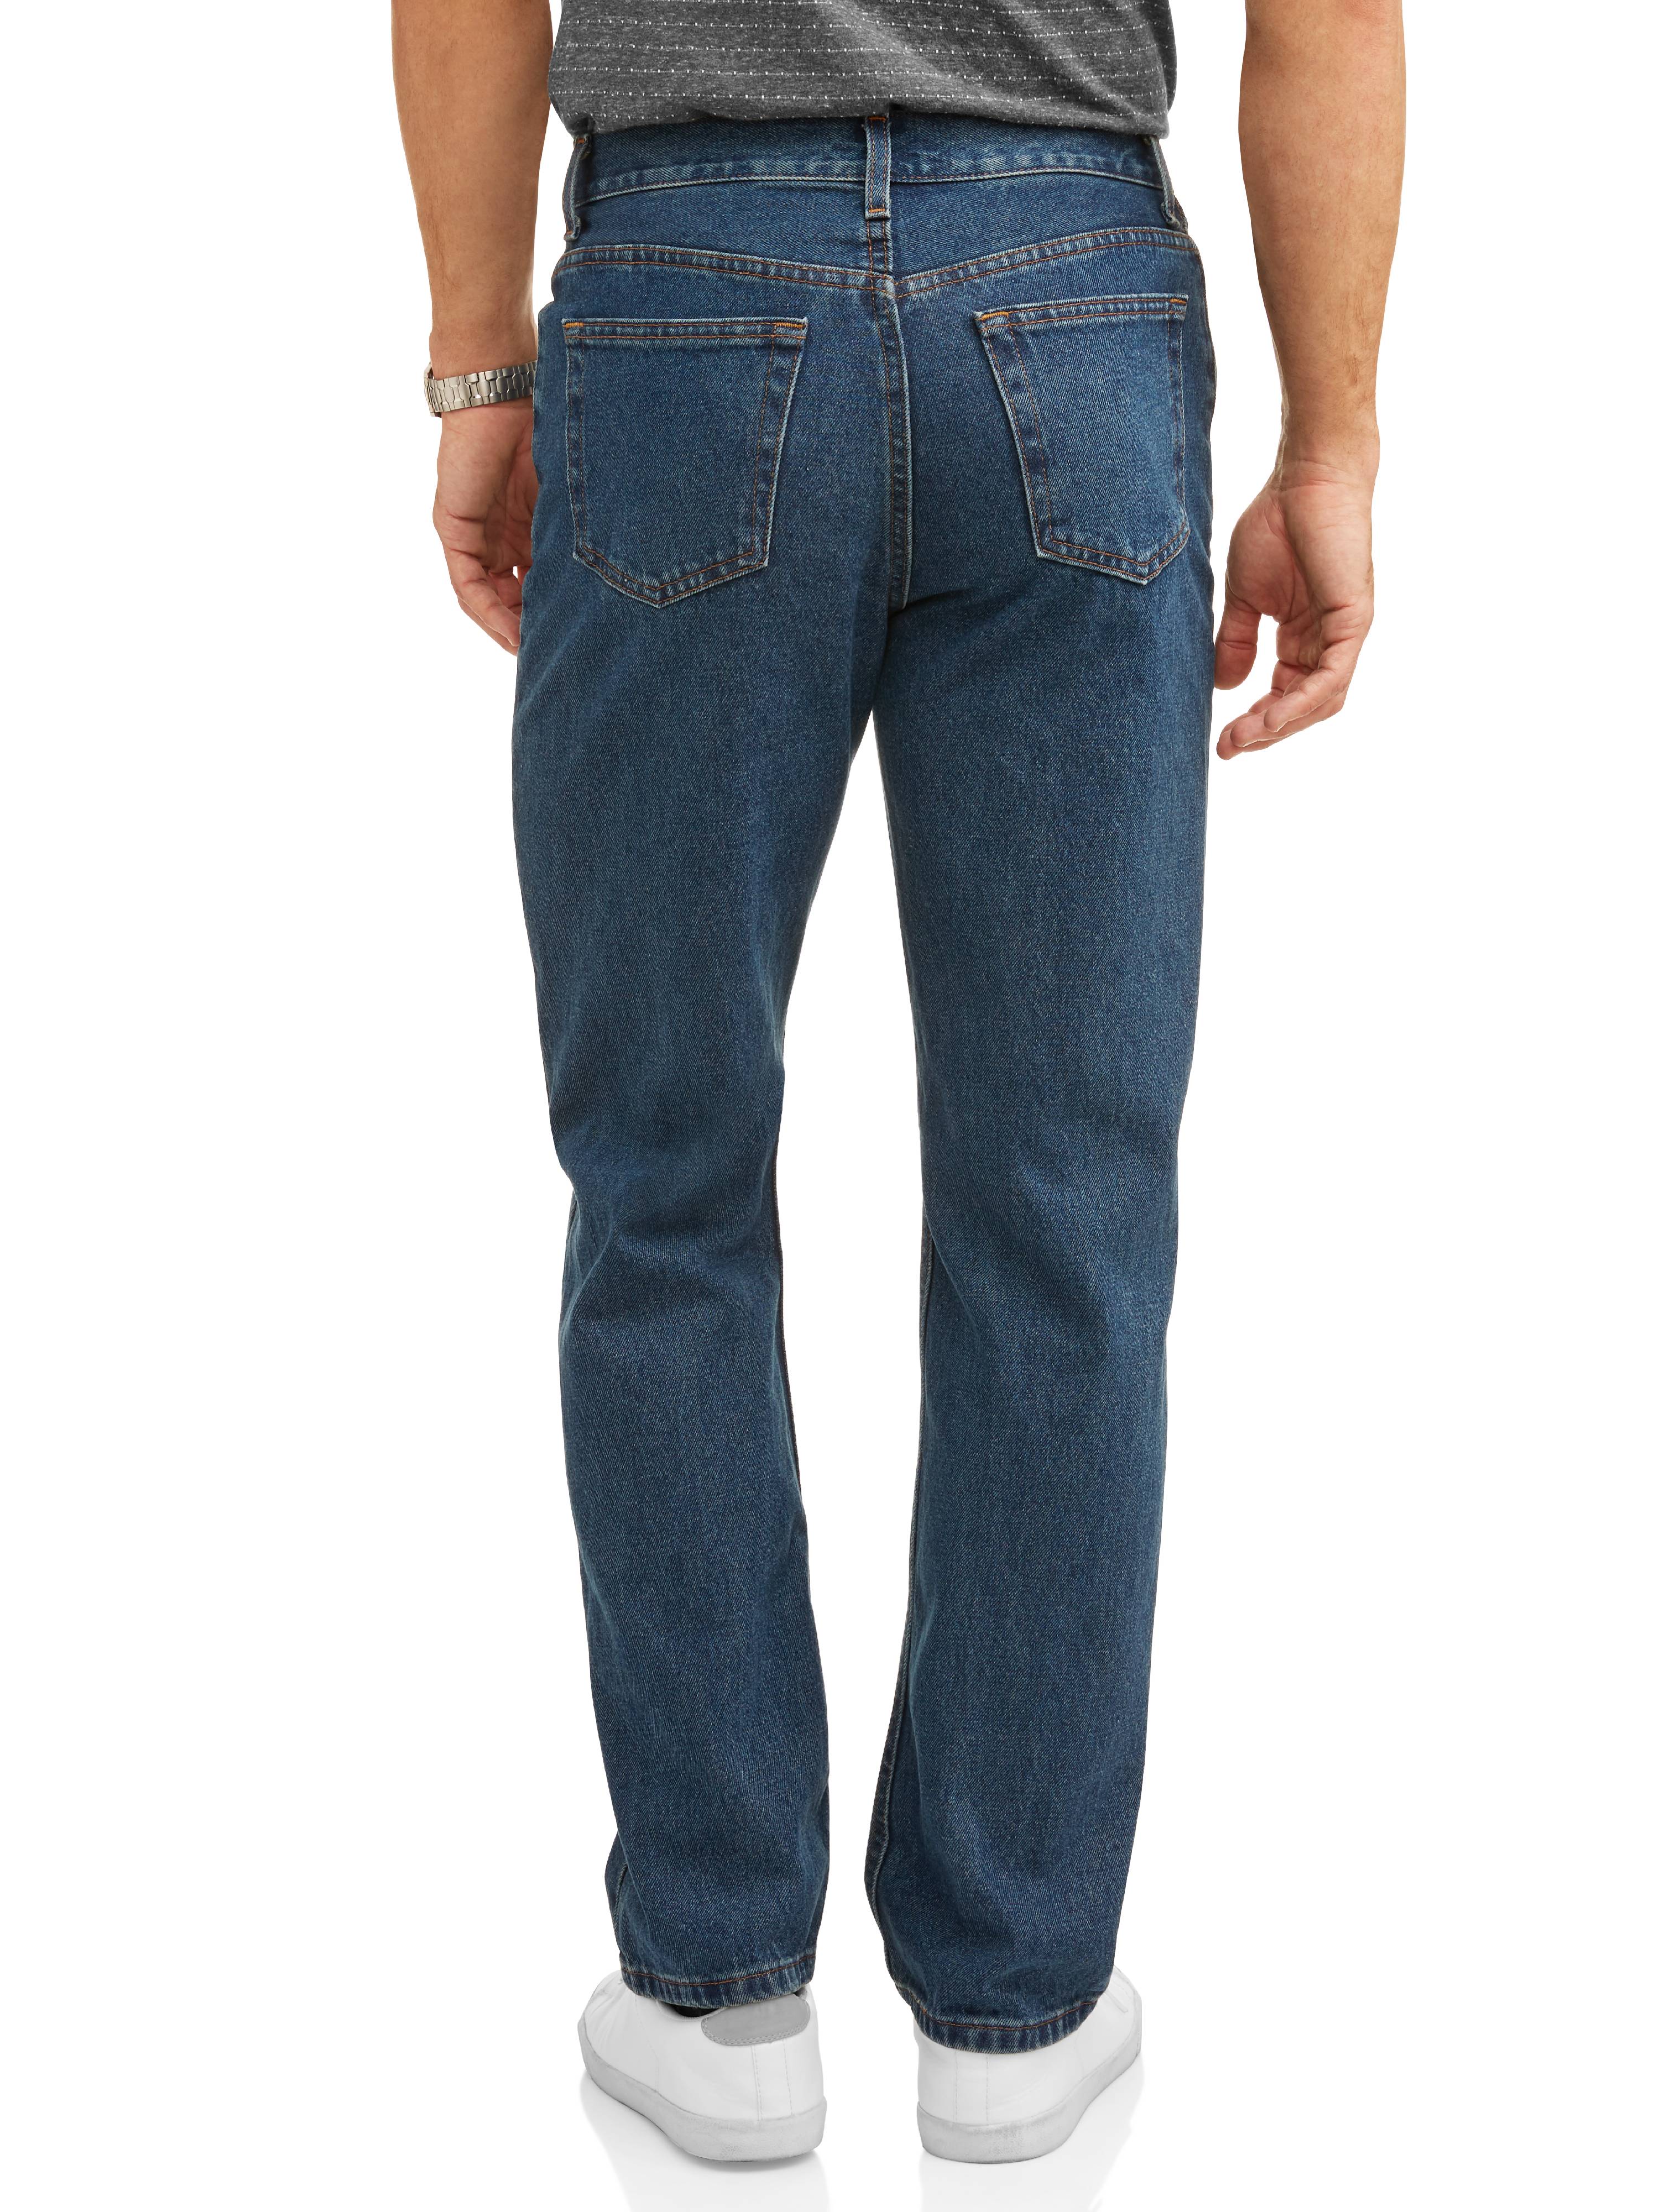 George Men's and Big Men's 100% Cotton Relaxed Fit Jeans - image 4 of 6